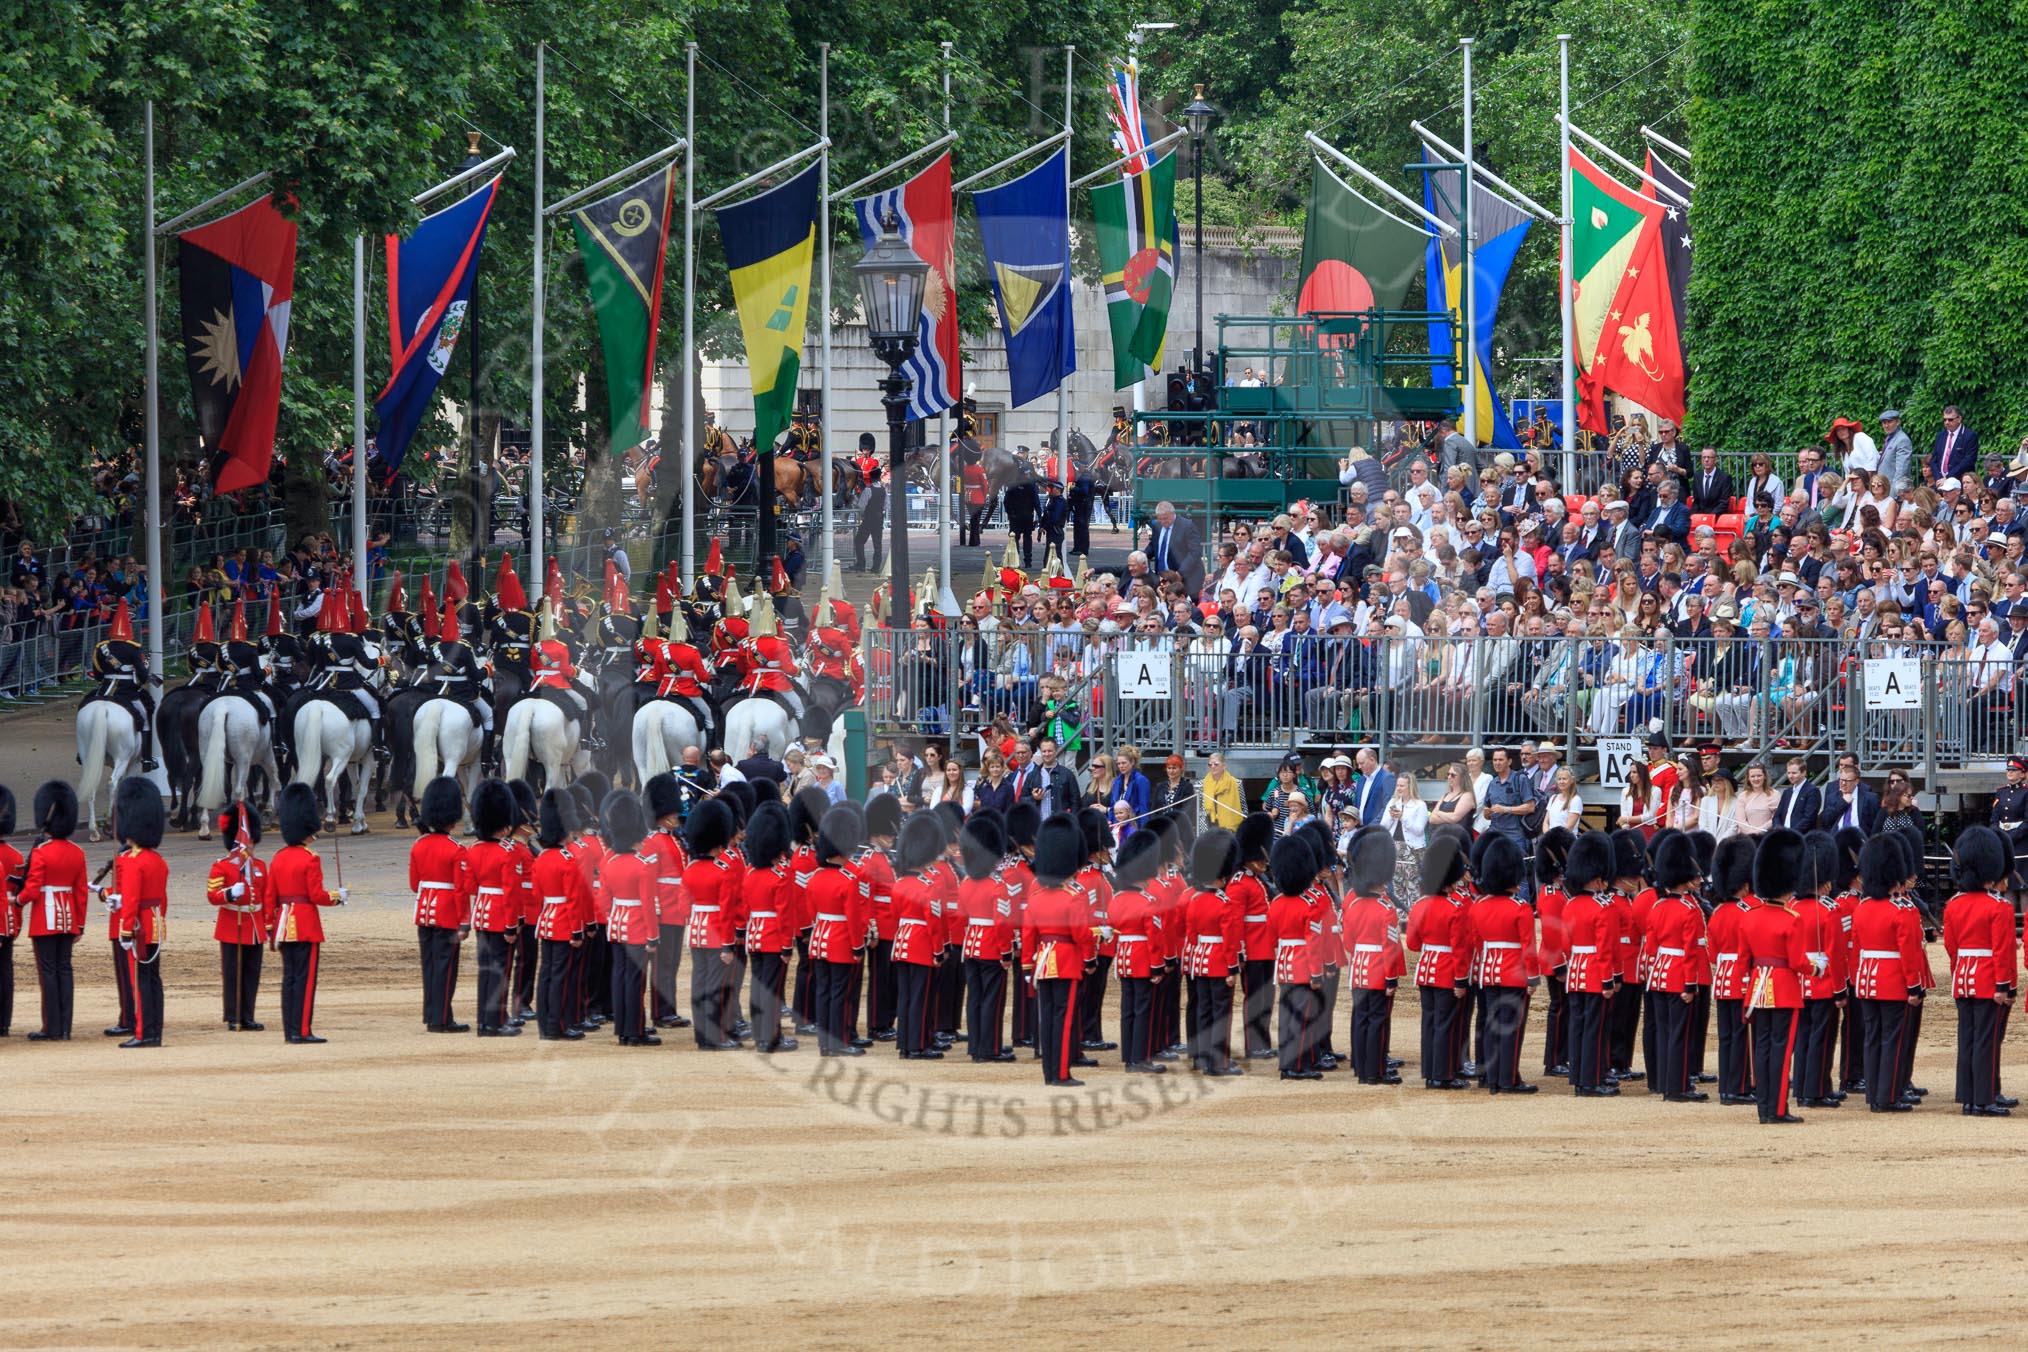 during The Colonel's Review {iptcyear4} (final rehearsal for Trooping the Colour, The Queen's Birthday Parade)  at Horse Guards Parade, Westminster, London, 2 June 2018, 12:08.